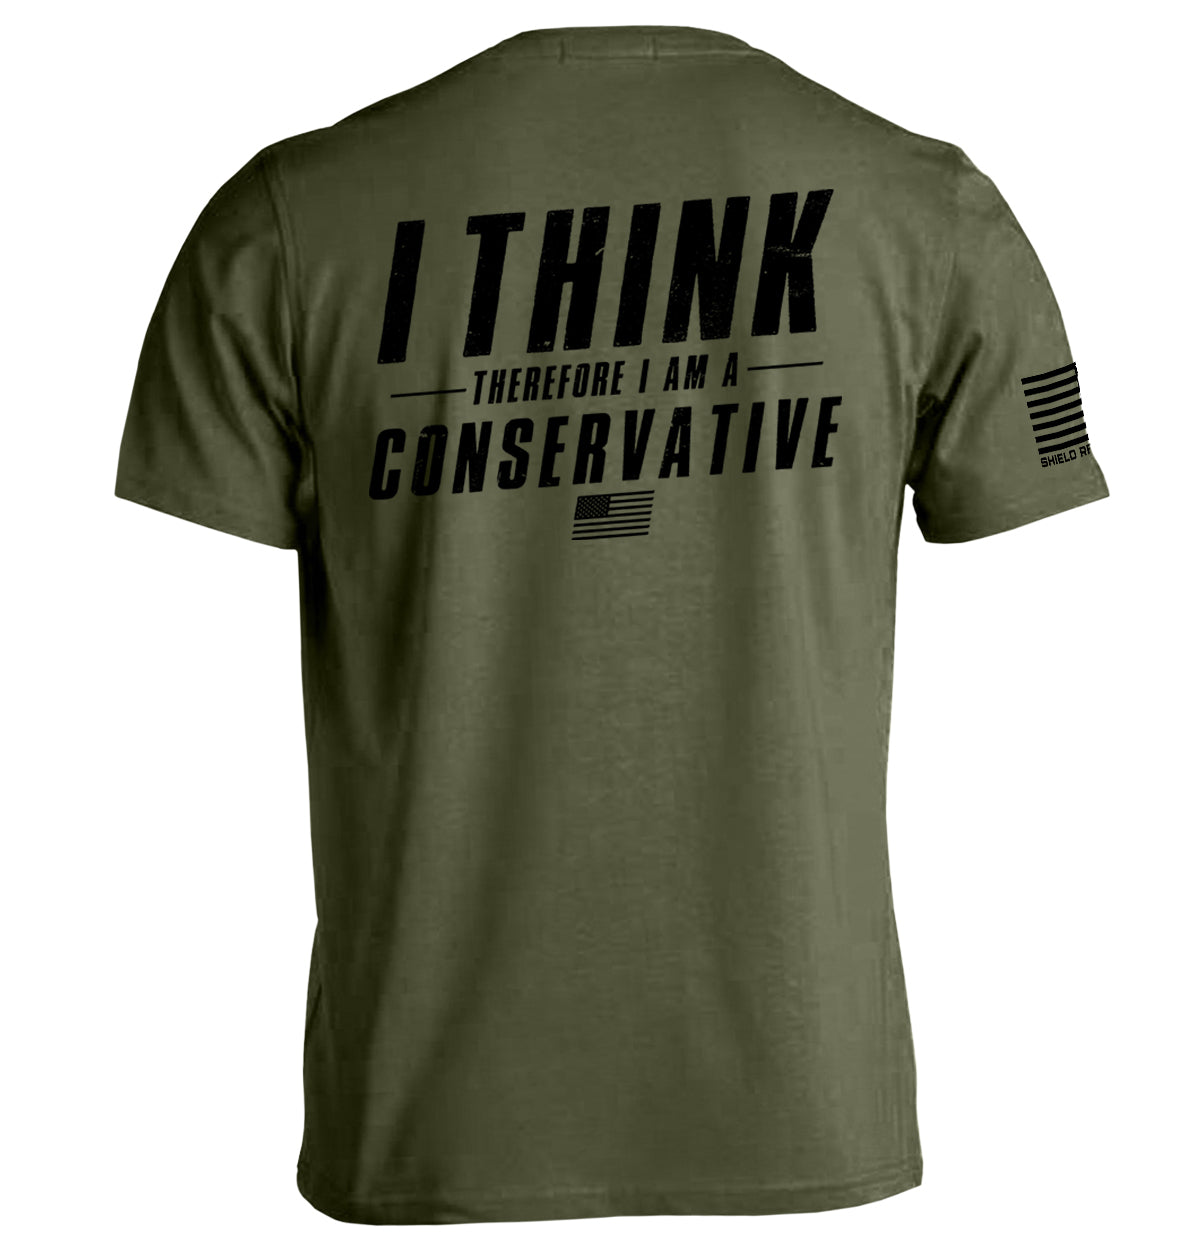 I Think Therefore I am a Conservative